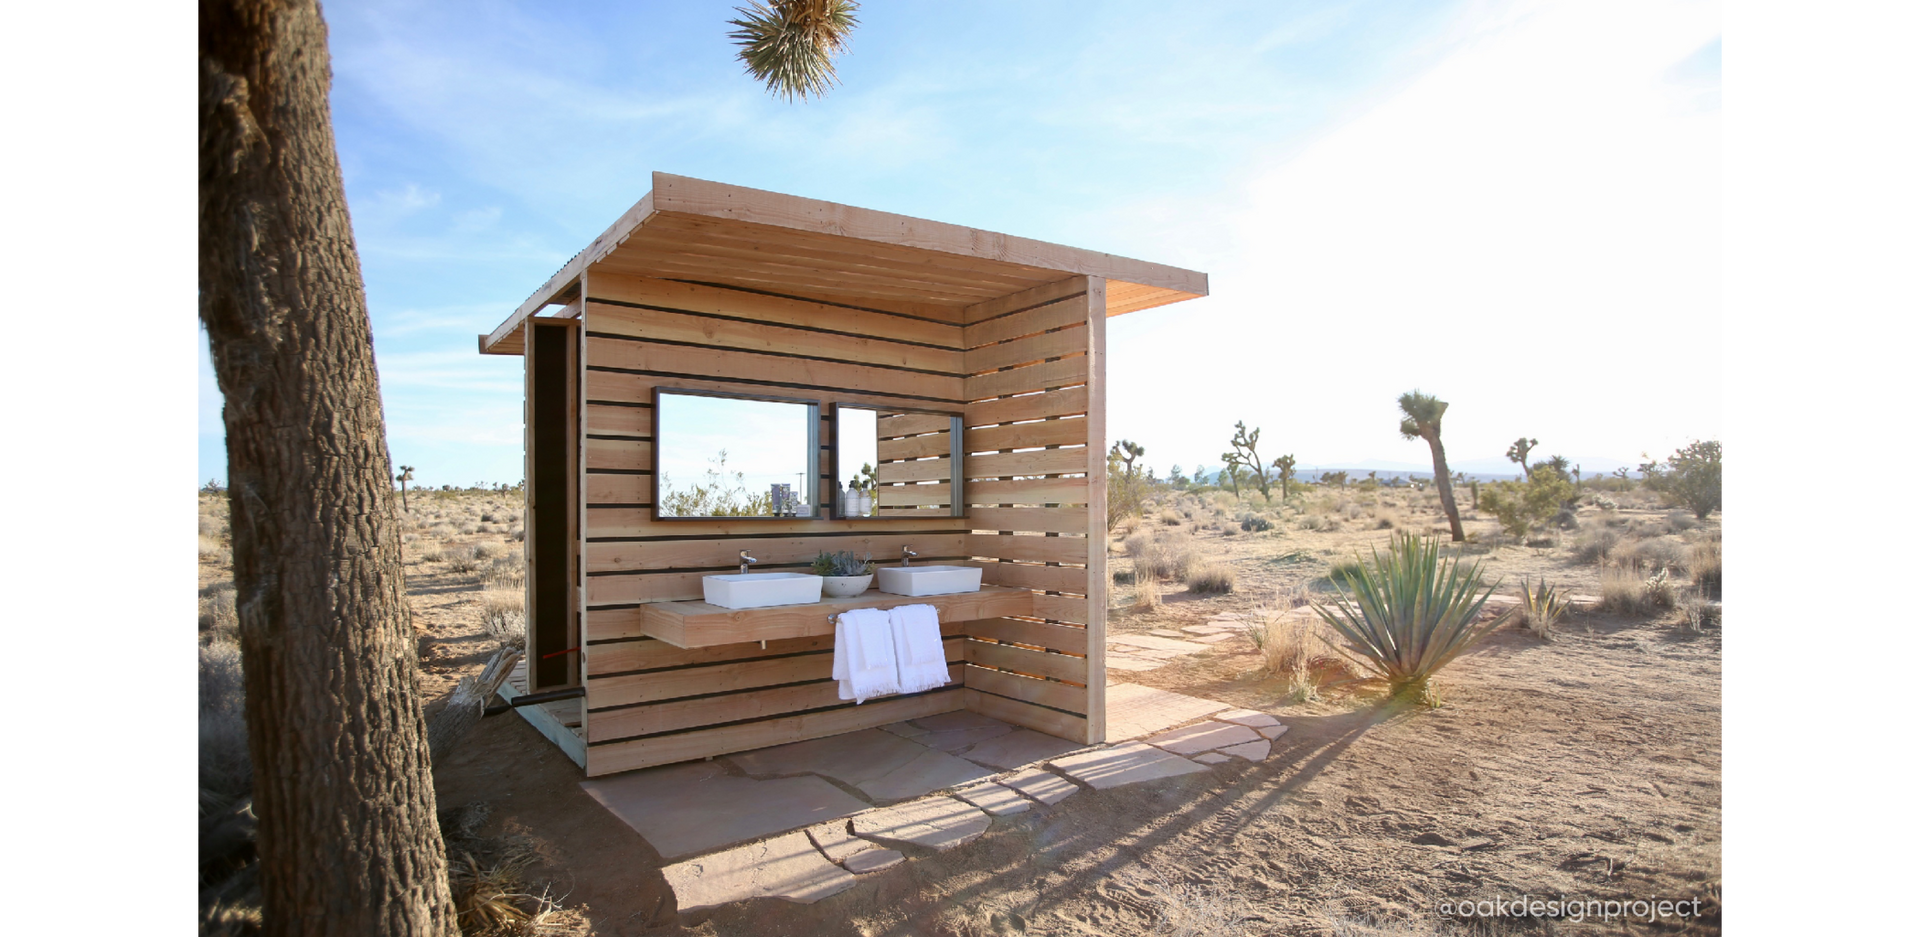 Yurt and outdoor bathroom designed by Oak Design Project